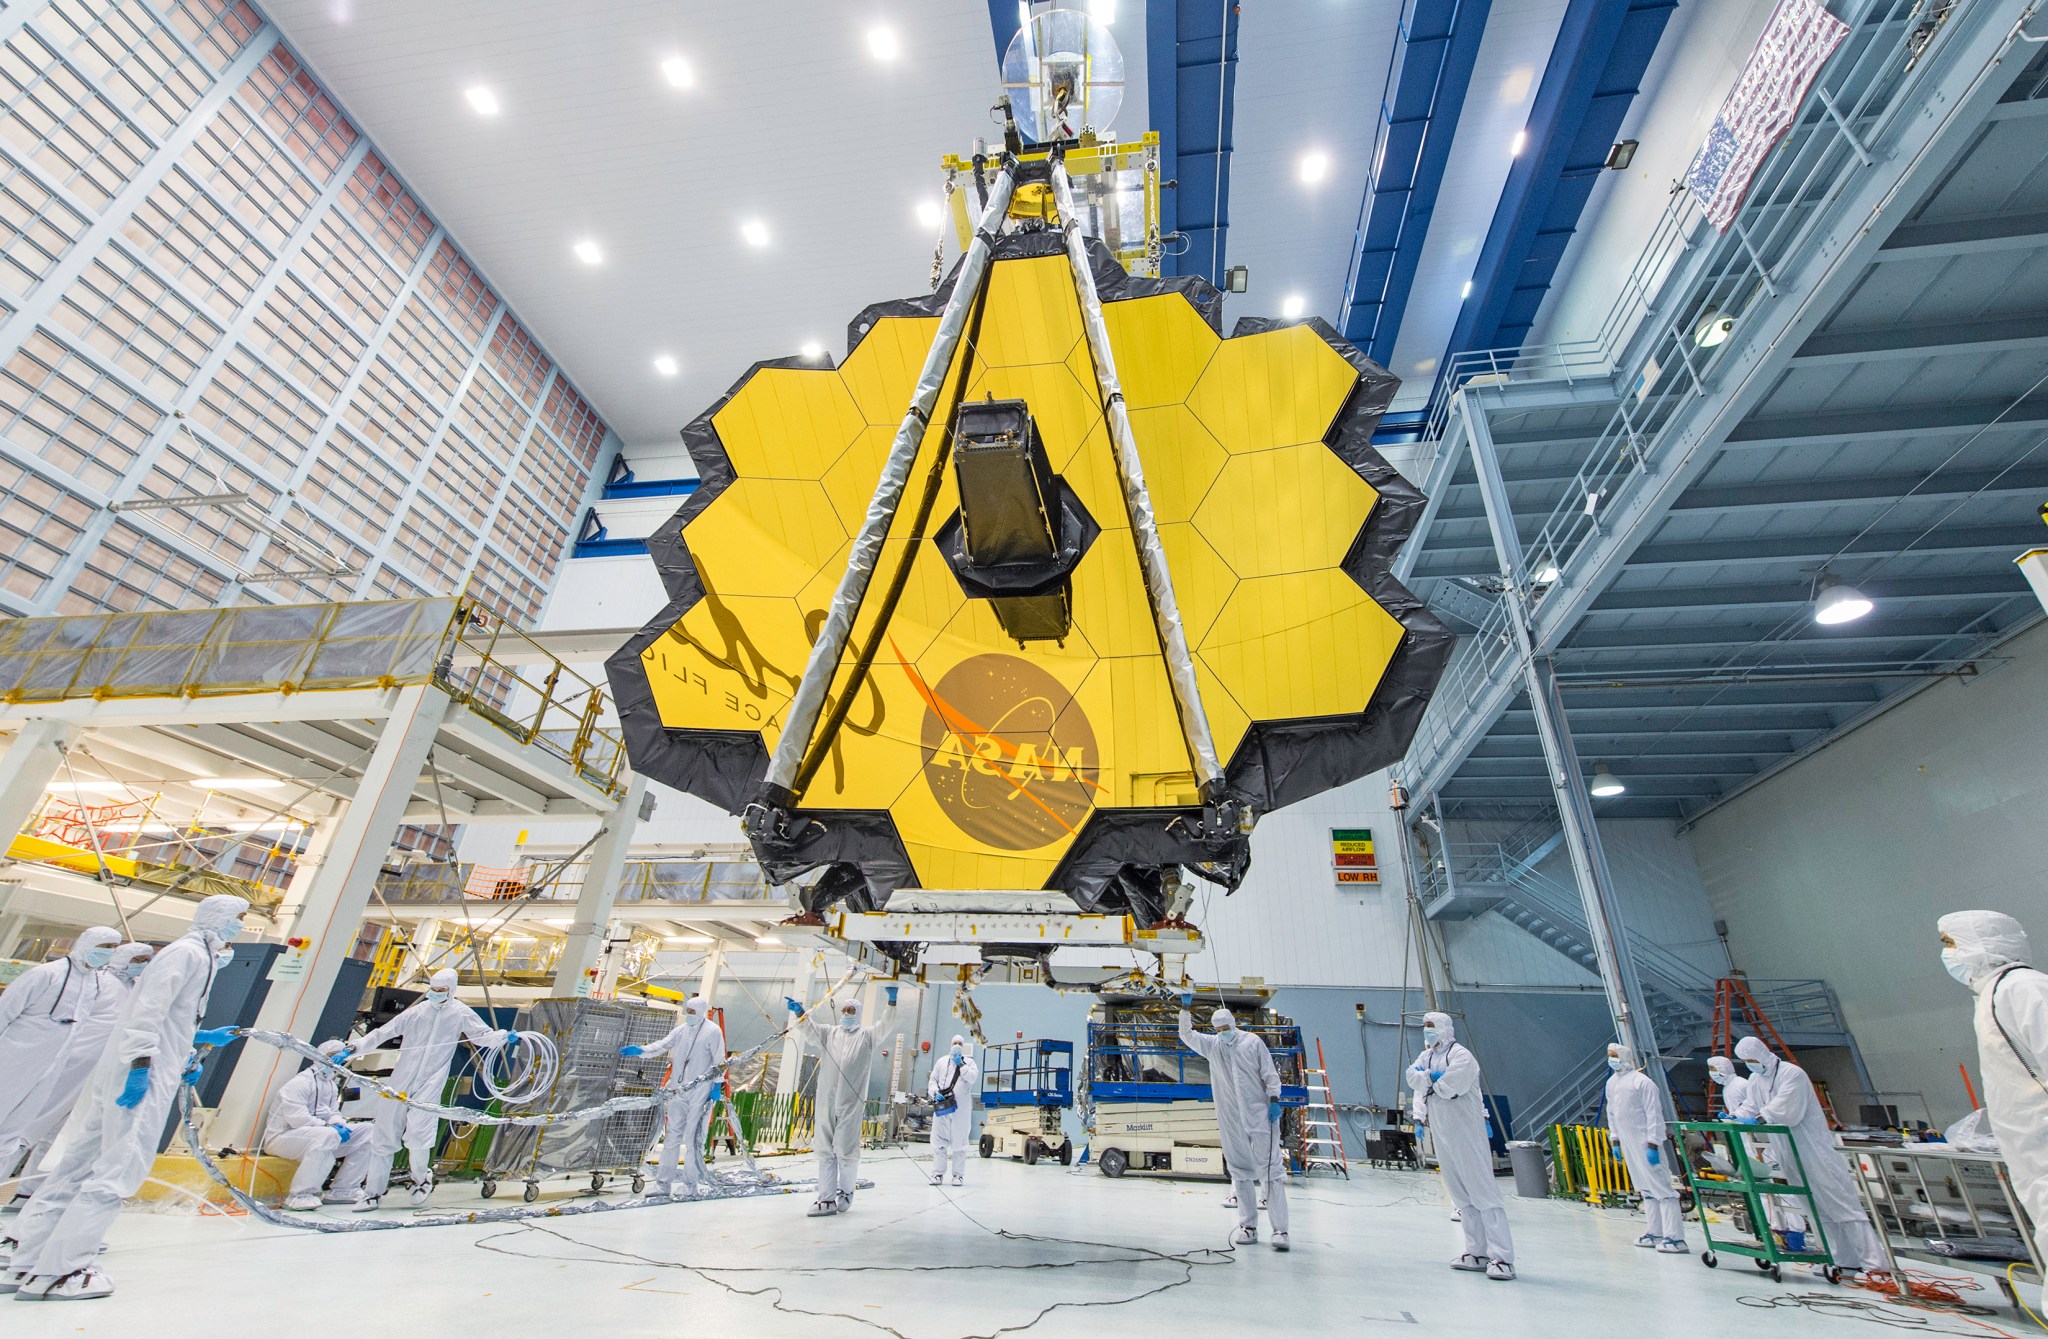 NASA technicians use a crane to lift and move the James Webb Space Telescope, with its 21-foot primary mirror deployed, inside a clean room at NASA’s Goddard Space Flight Center in Greenbelt, Maryland, in April 2017.